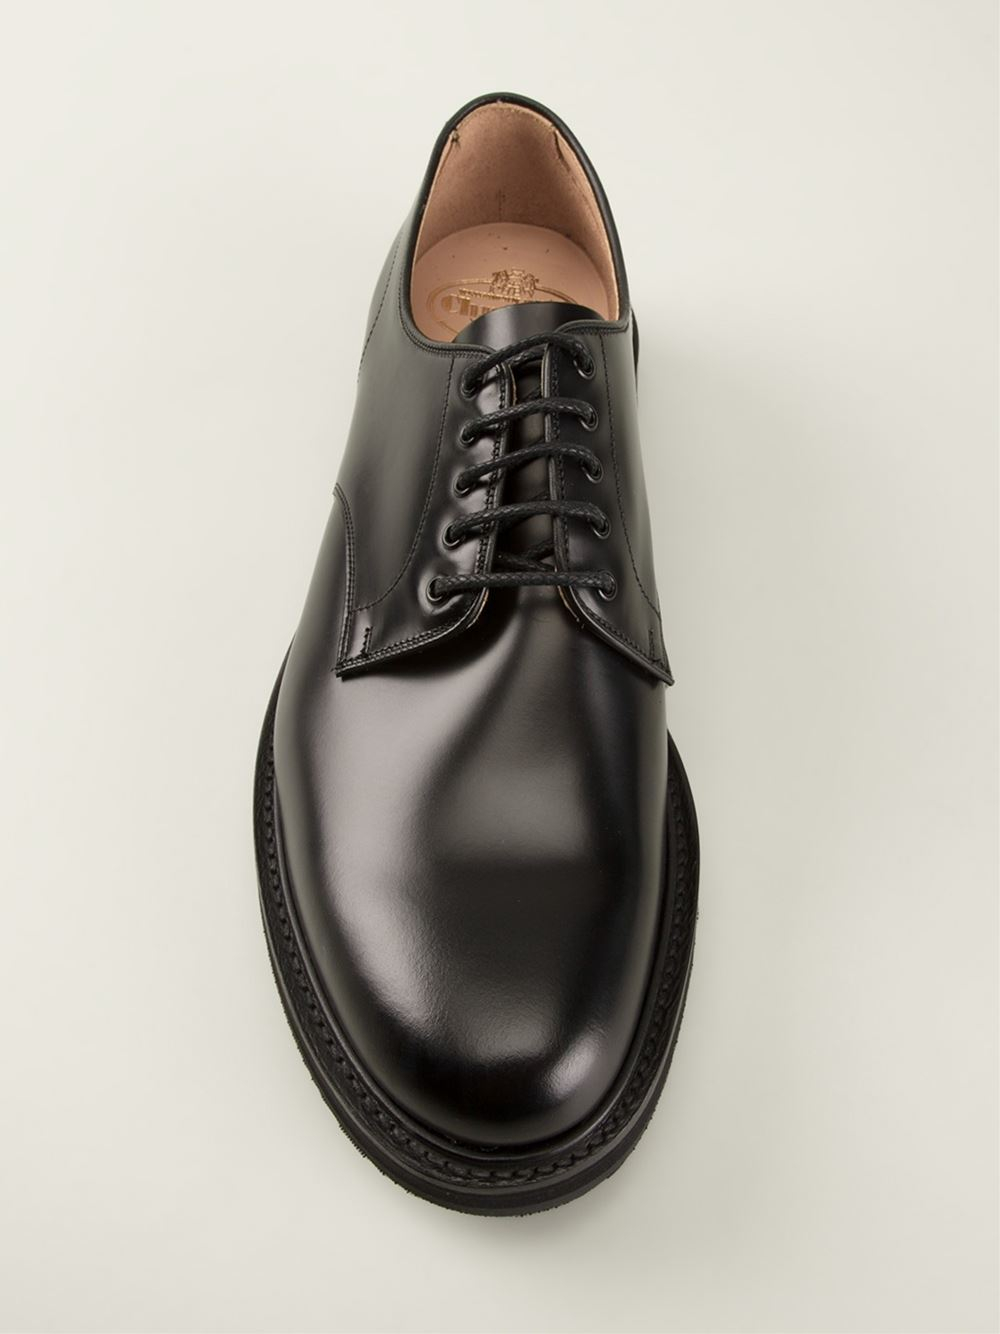 Lyst - Church's Rubber Sole Derby Shoes in Black for Men